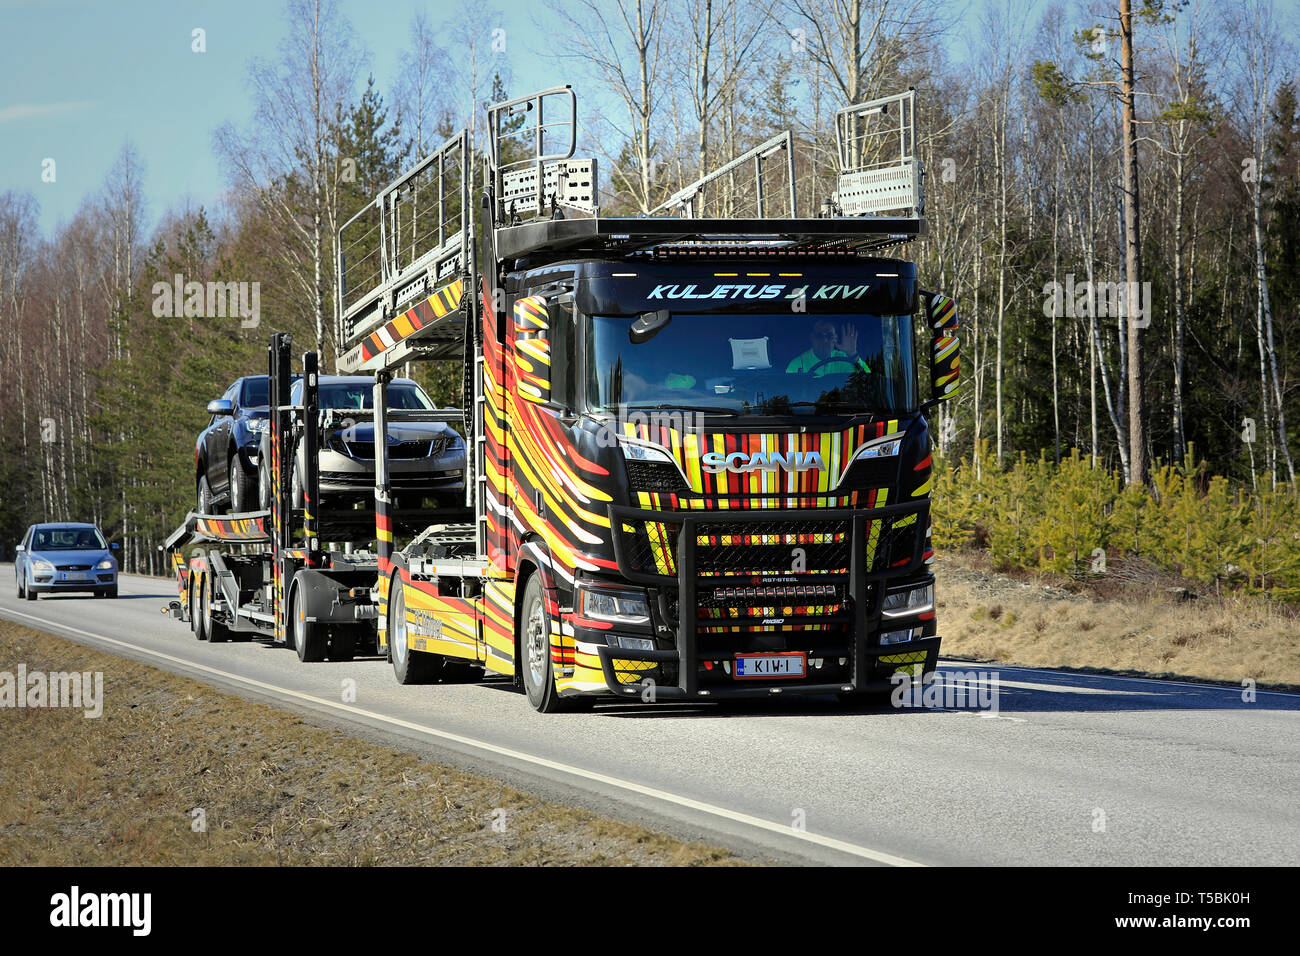 Tenhola, Finland - April 12, 2019: Unique vehicle carrier Scania R650 of Kuljetus J. Kivi hauls cars along rural highway on a day of spring. Stock Photo